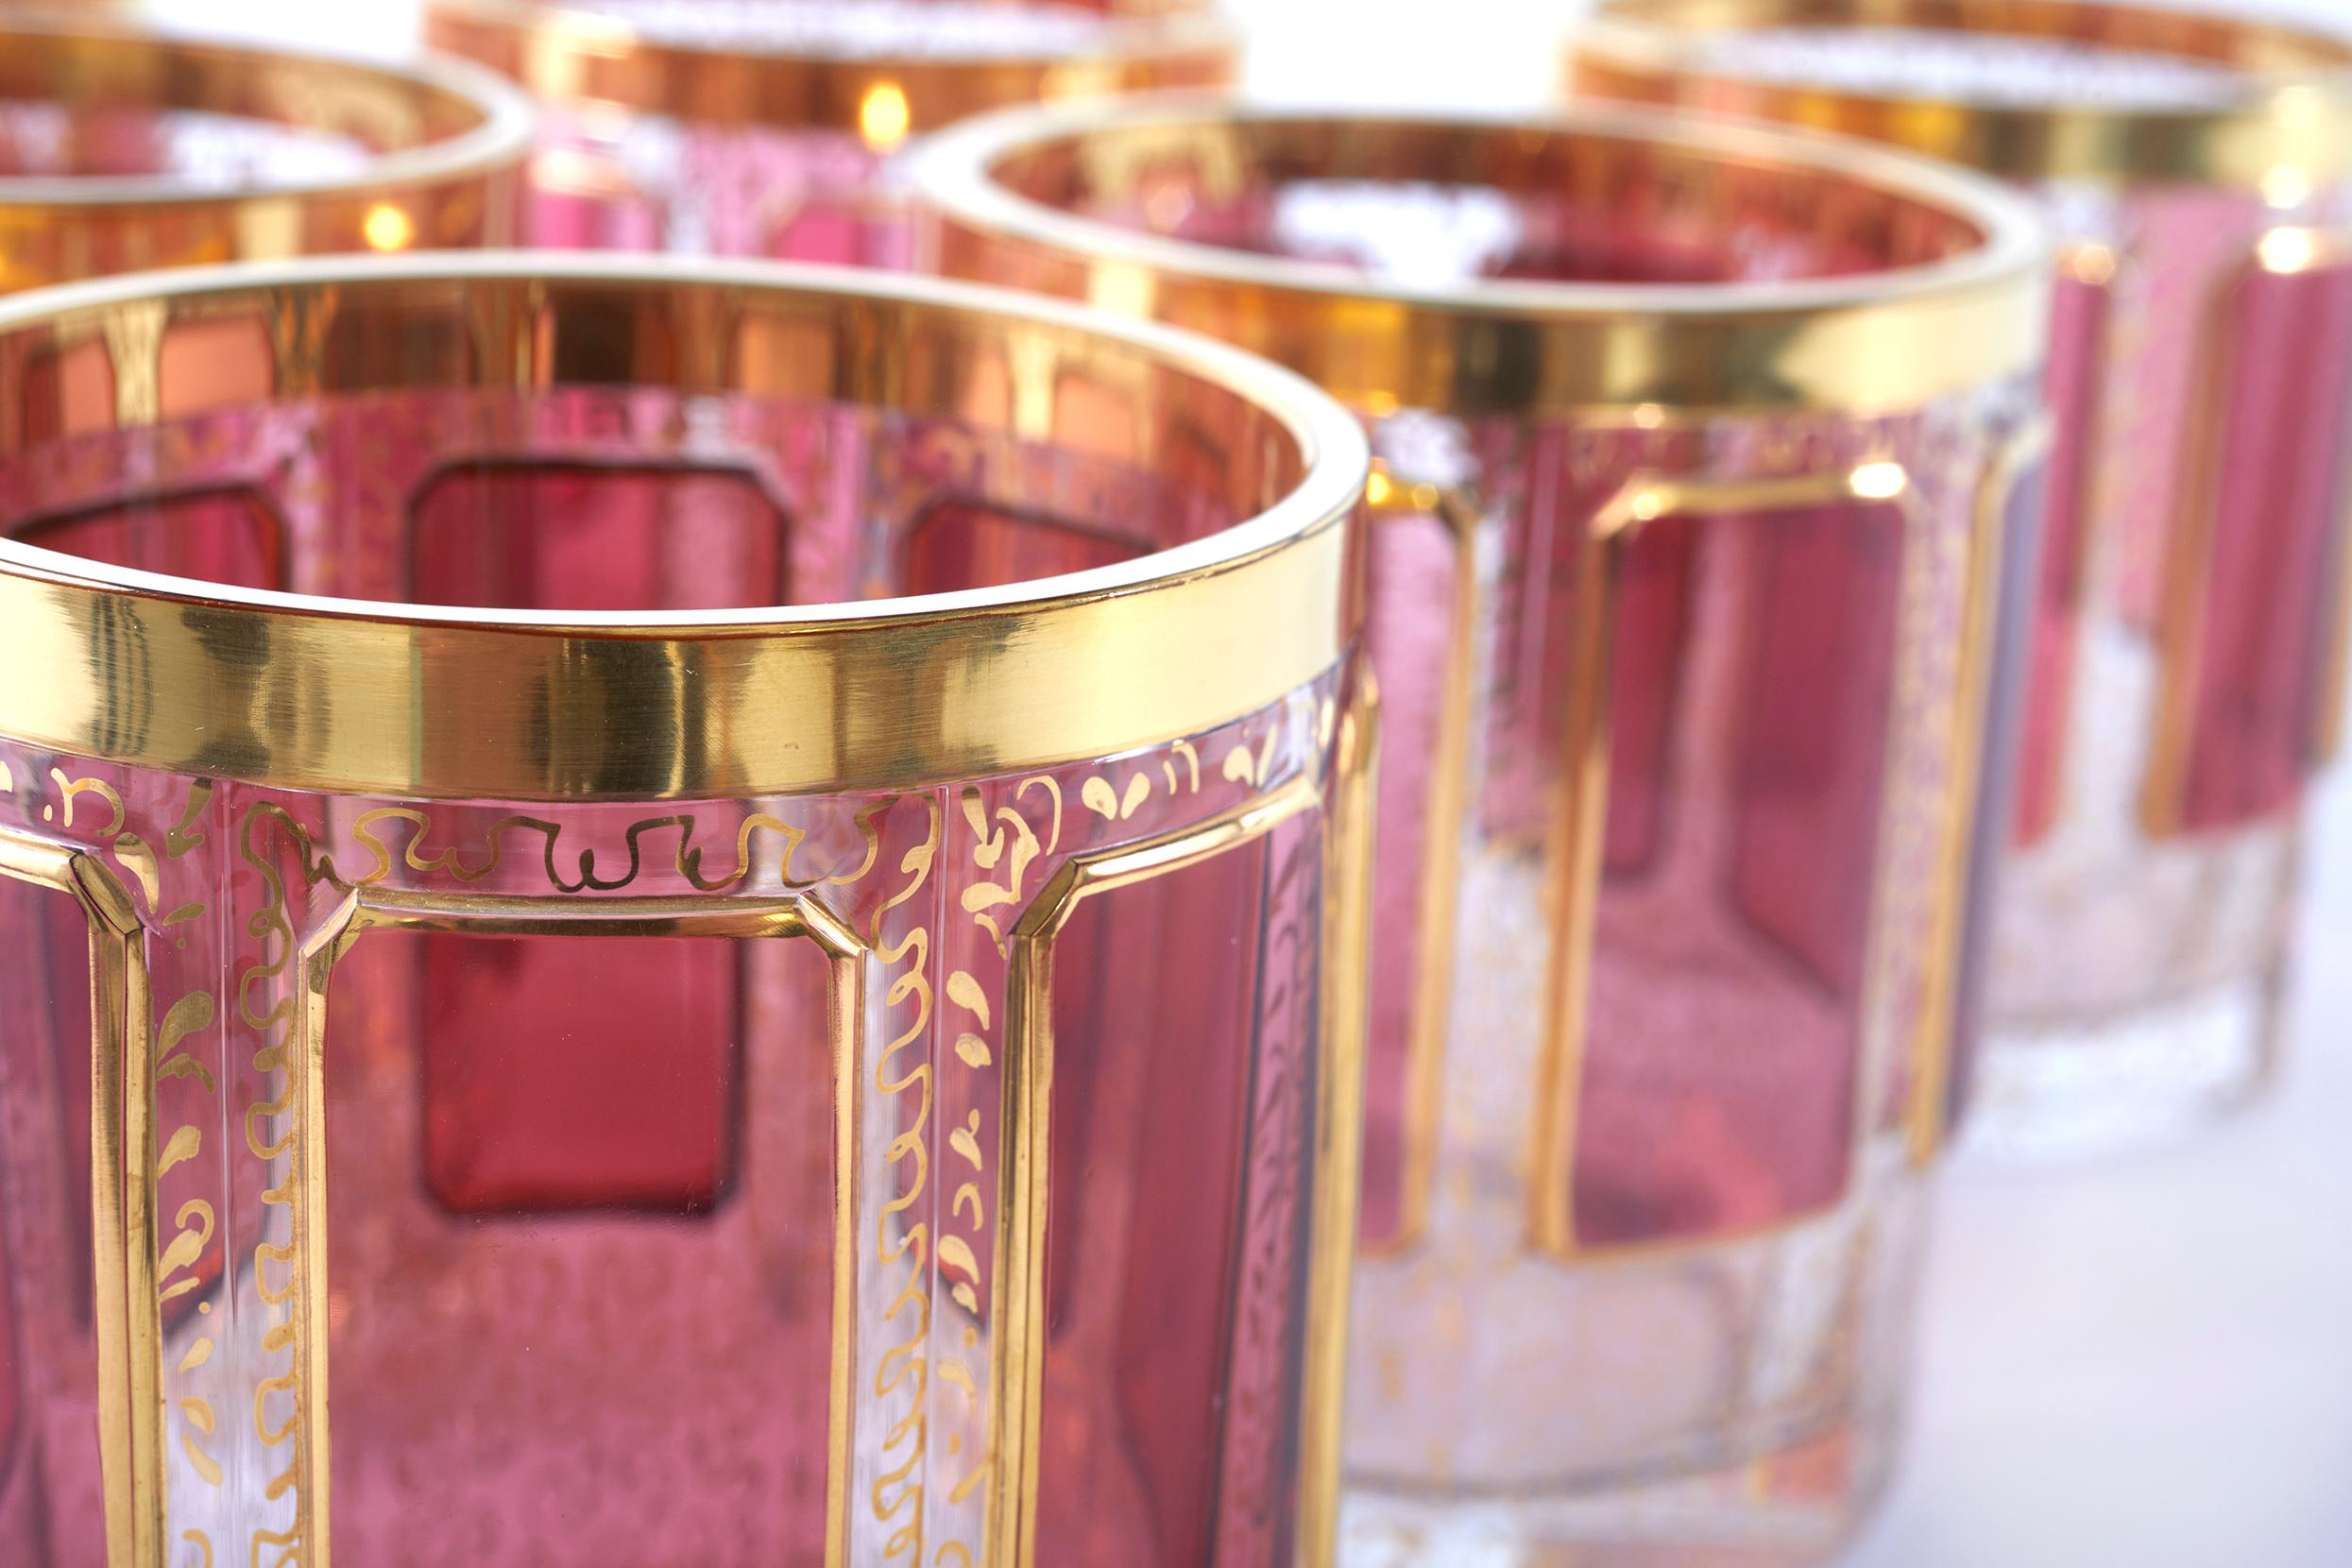 Set of Moser gilt enameled pink paneled whiskey / scotch glassware service for six people. Each one is made of a very heavy glass with raised eight pink colored panels, with intricate gilt enamel all over . Each glass is excellent condition .  No